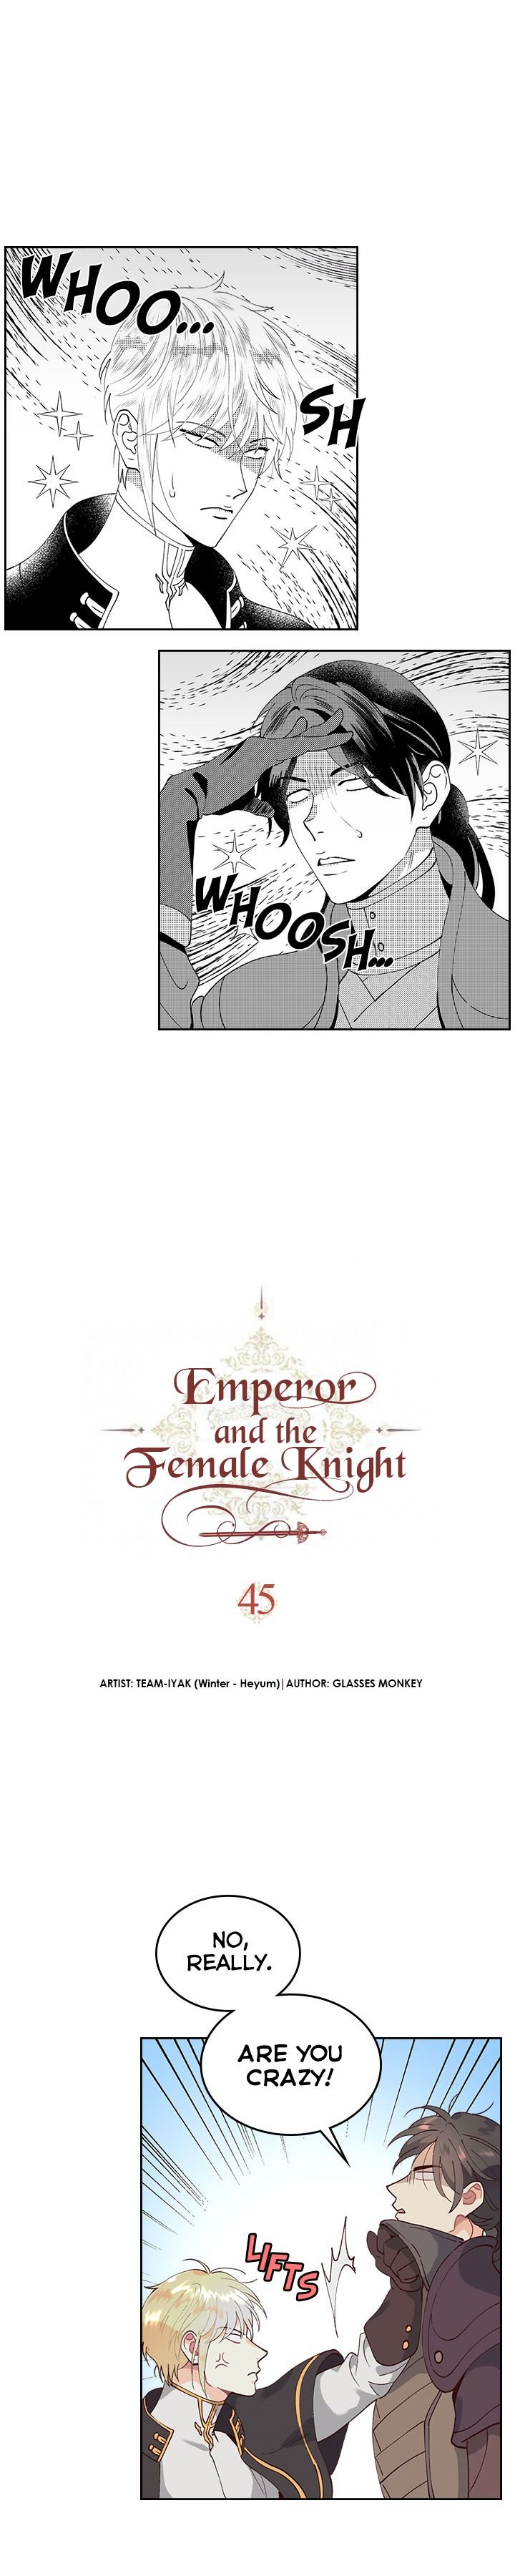 emperor-and-the-female-knight-chap-45-1